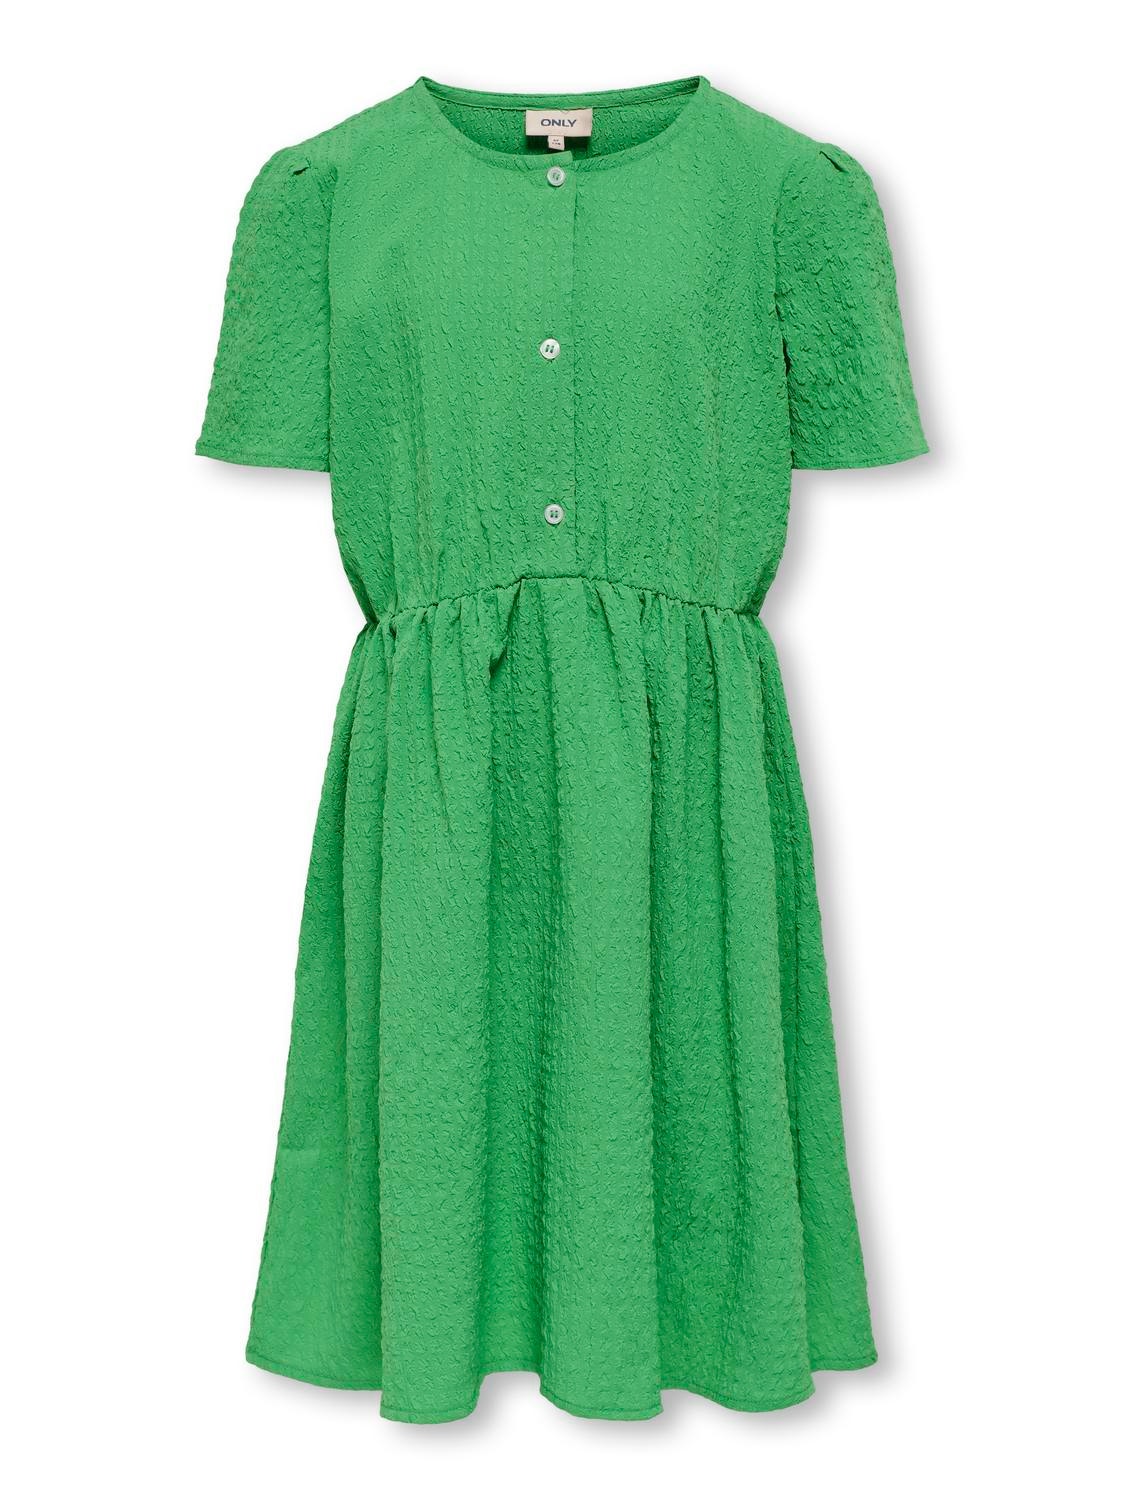 ONLY Short sleeved Dress -Kelly Green - 15257592